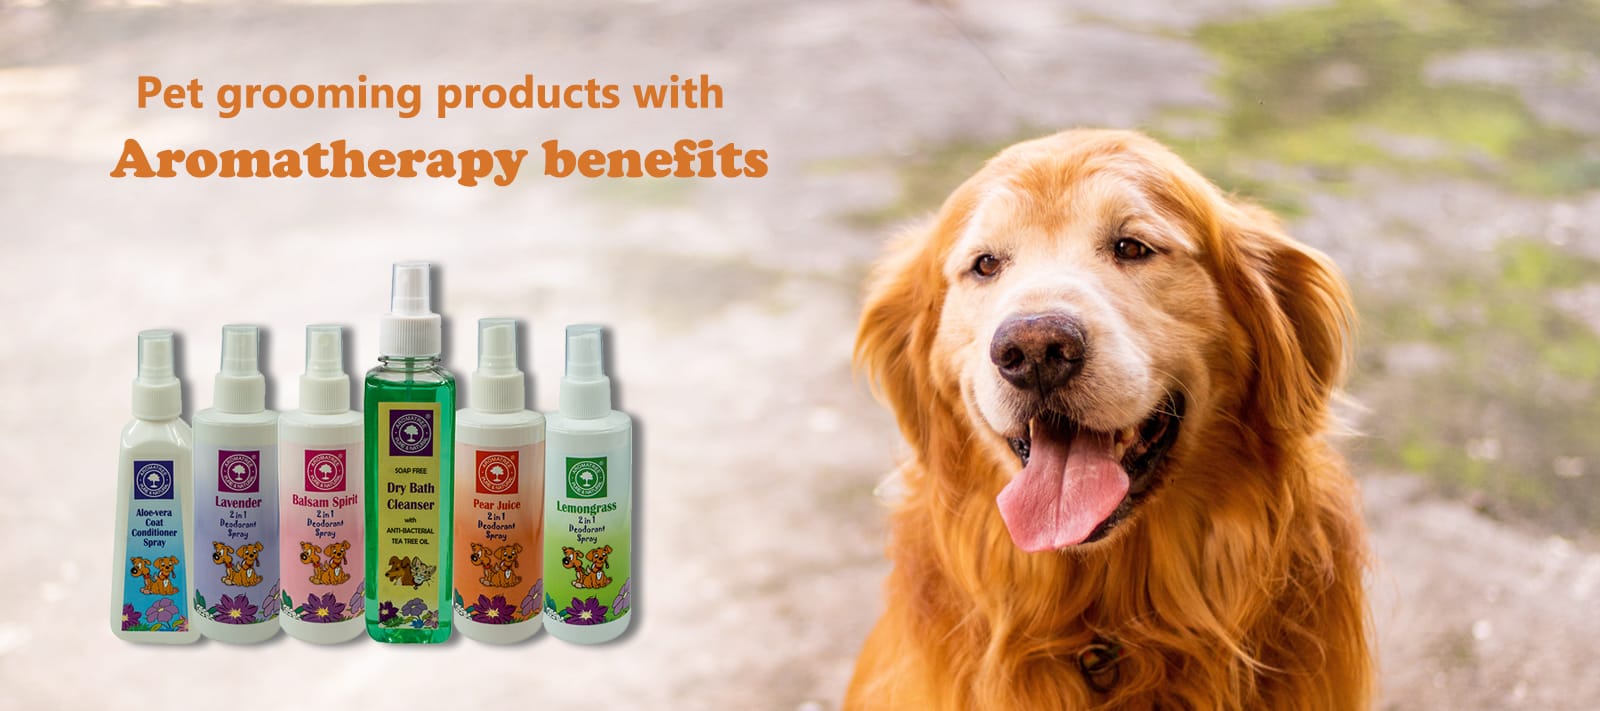 Pet grooming products